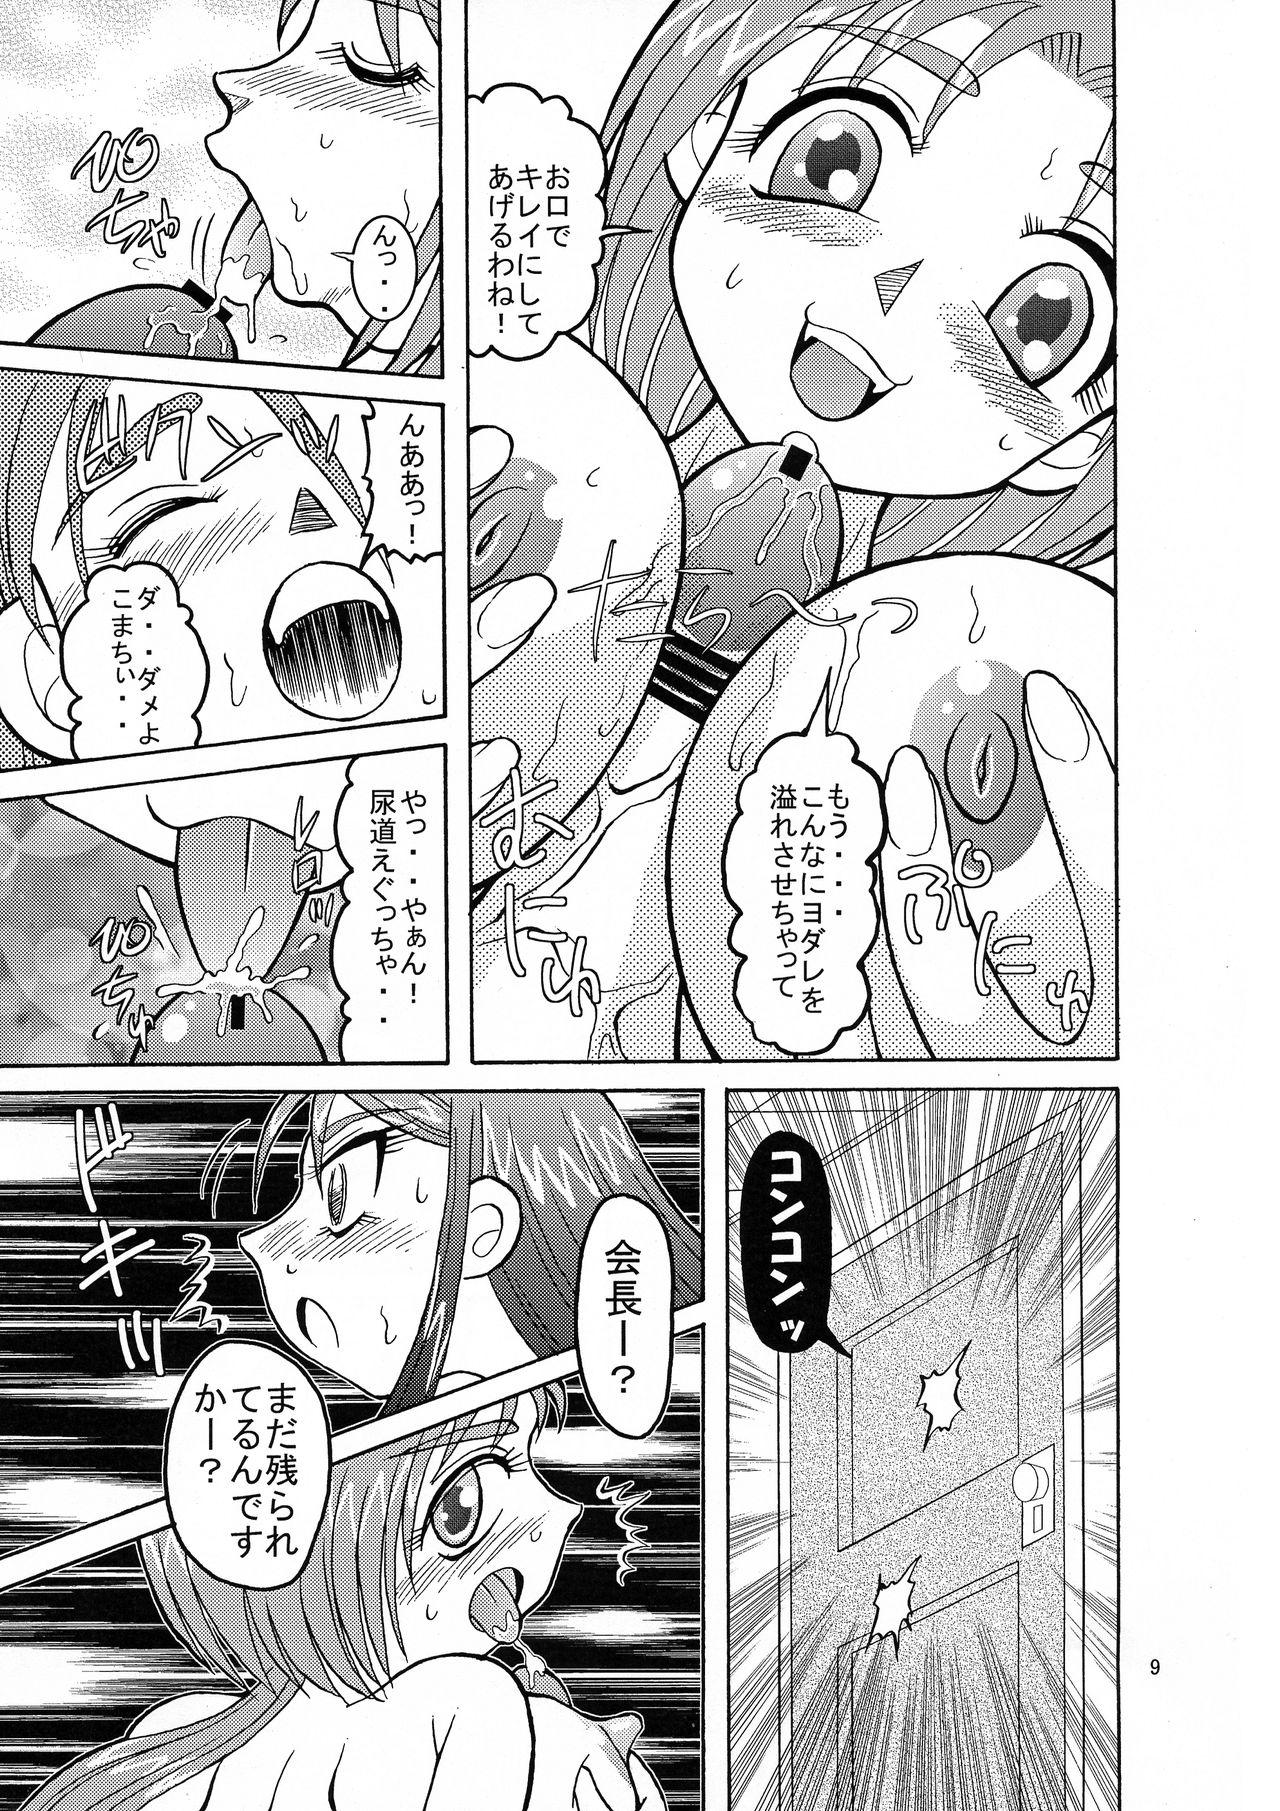 Tight Ass Komakare GO! GO! - Yes precure 5 Pink - Page 9